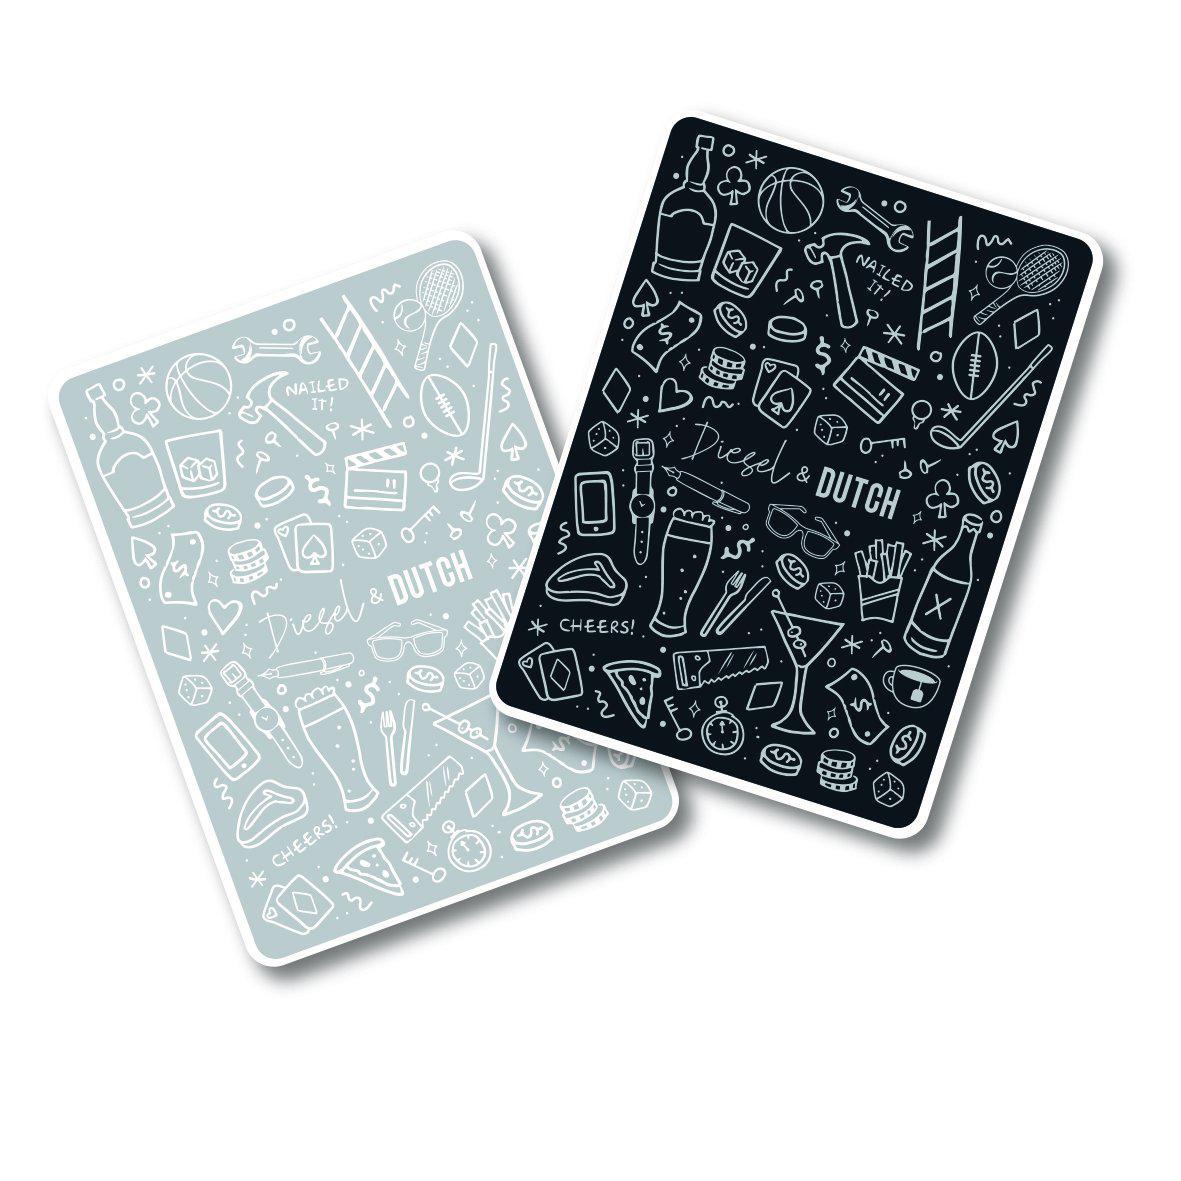 MAD MEN PLAYING CARDS-Diesel and Dutch-Lima & Co